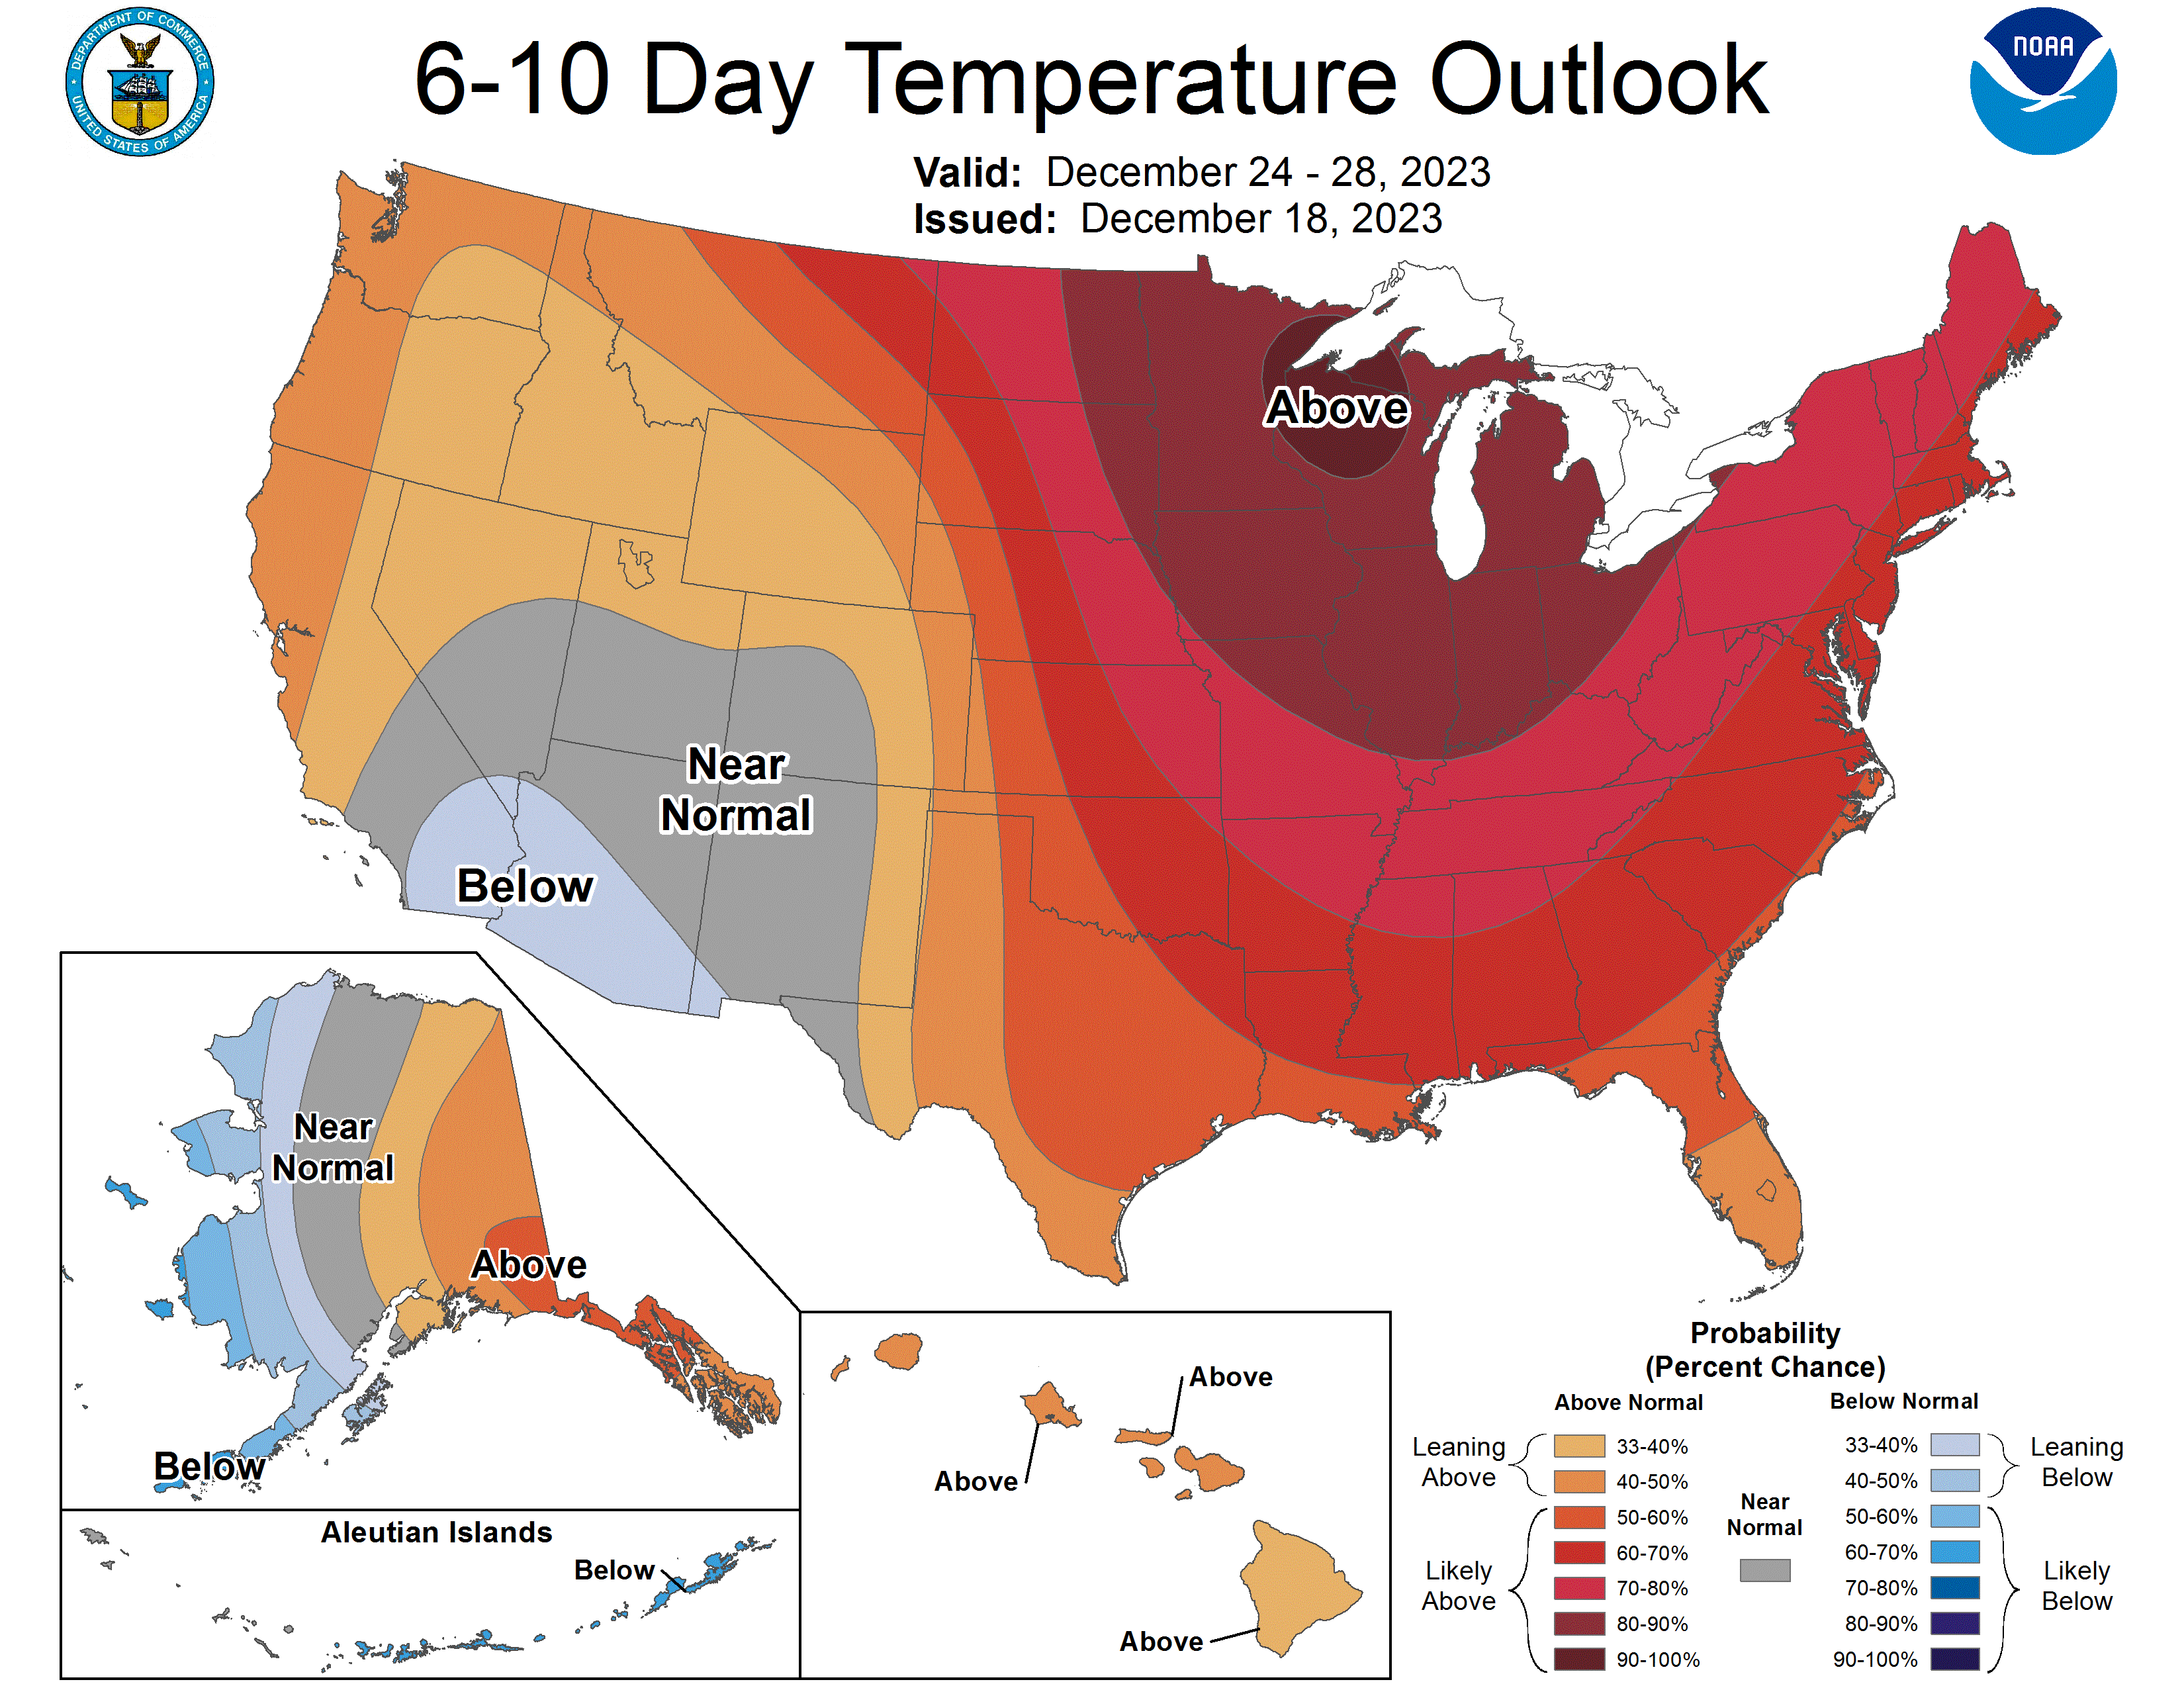 6-10 day temperature forecast for 2022 and 2023